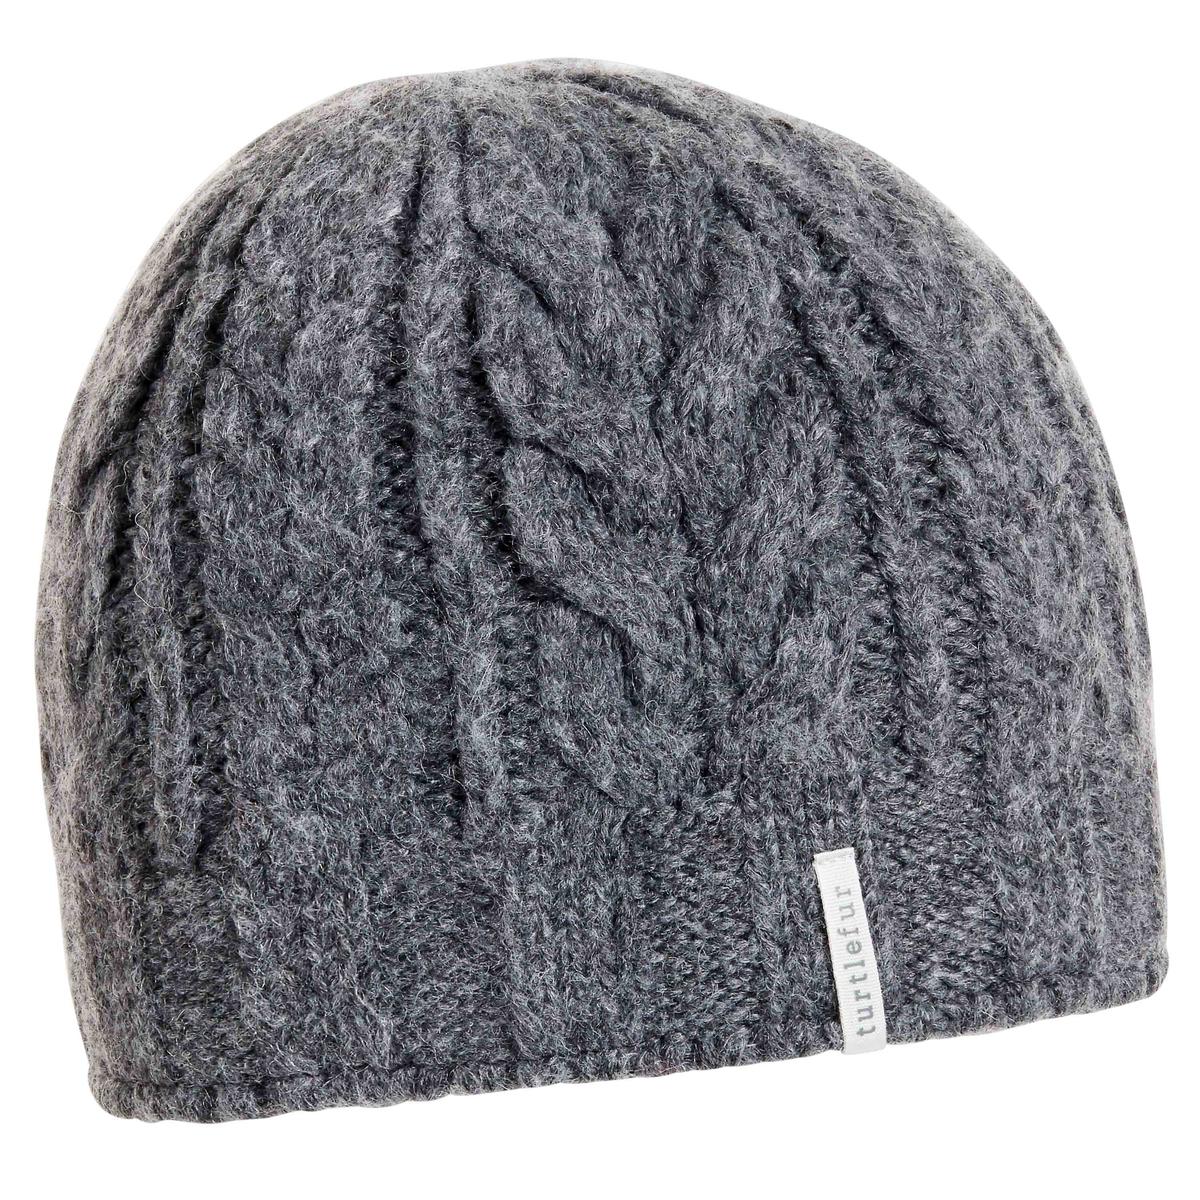 Turtle Fur Sky Beanie Recycled Knit Winter Hat Charcoal